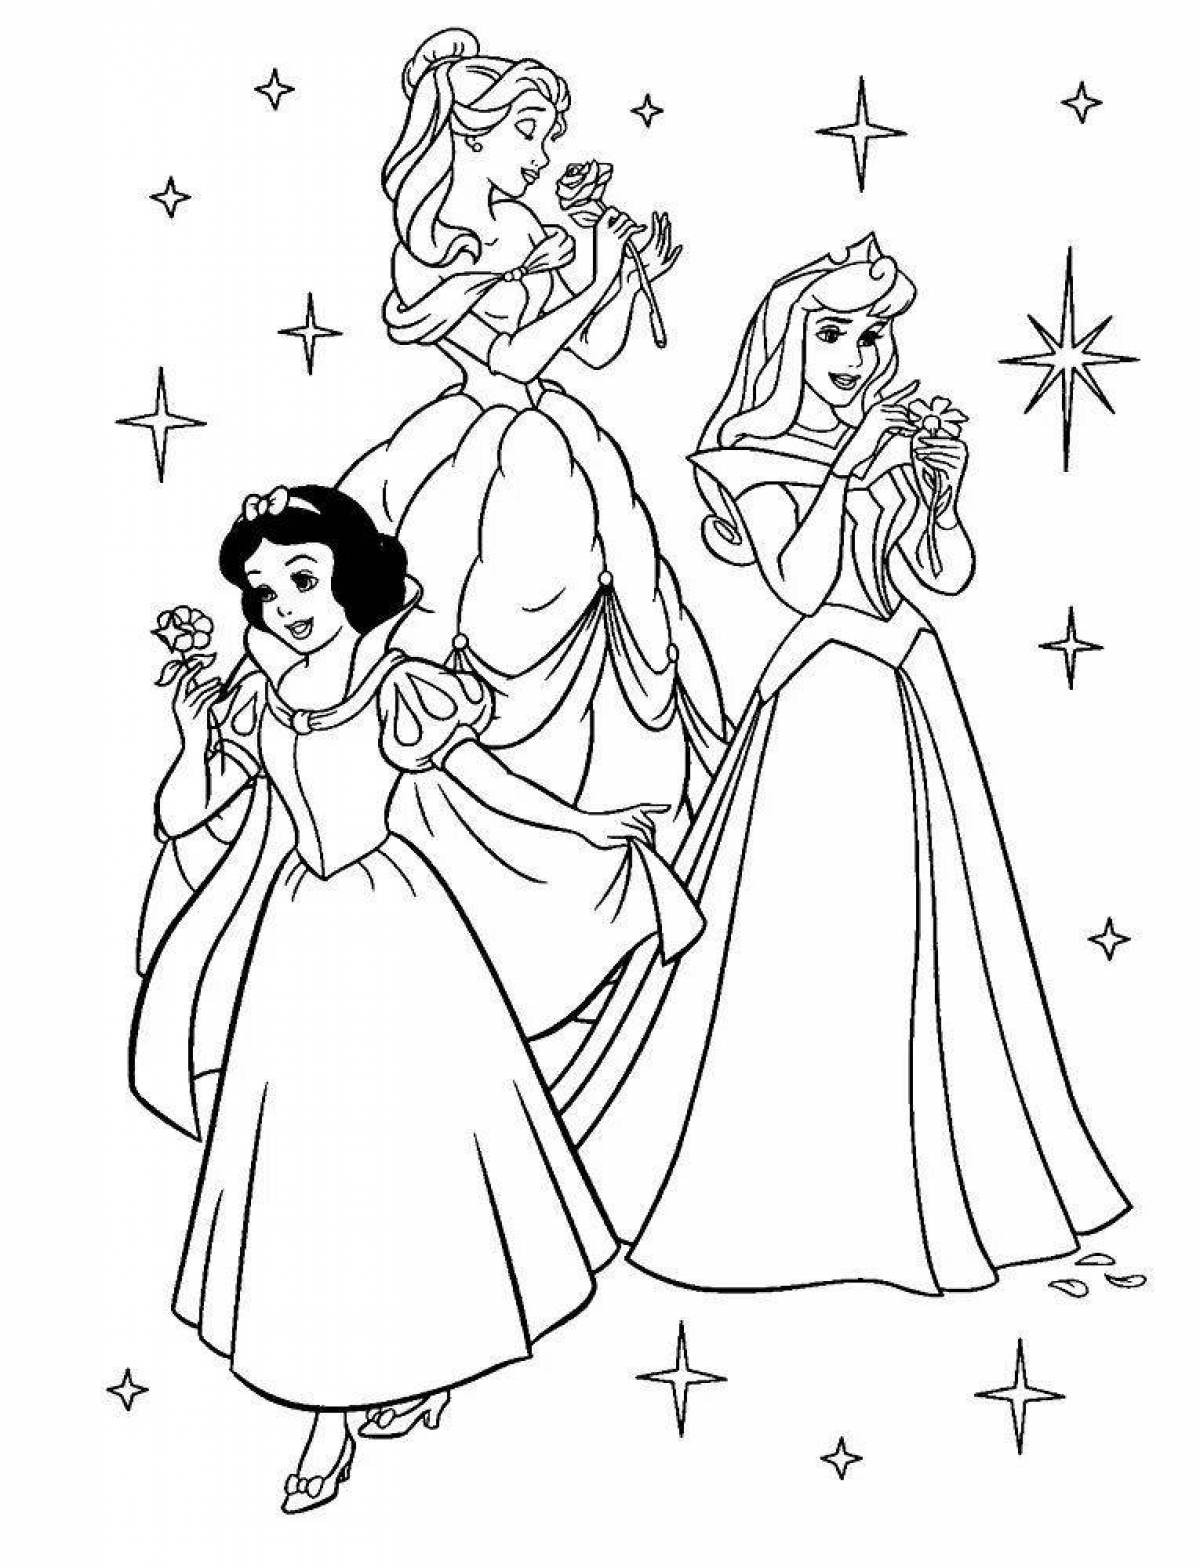 Serene coloring page all princesses